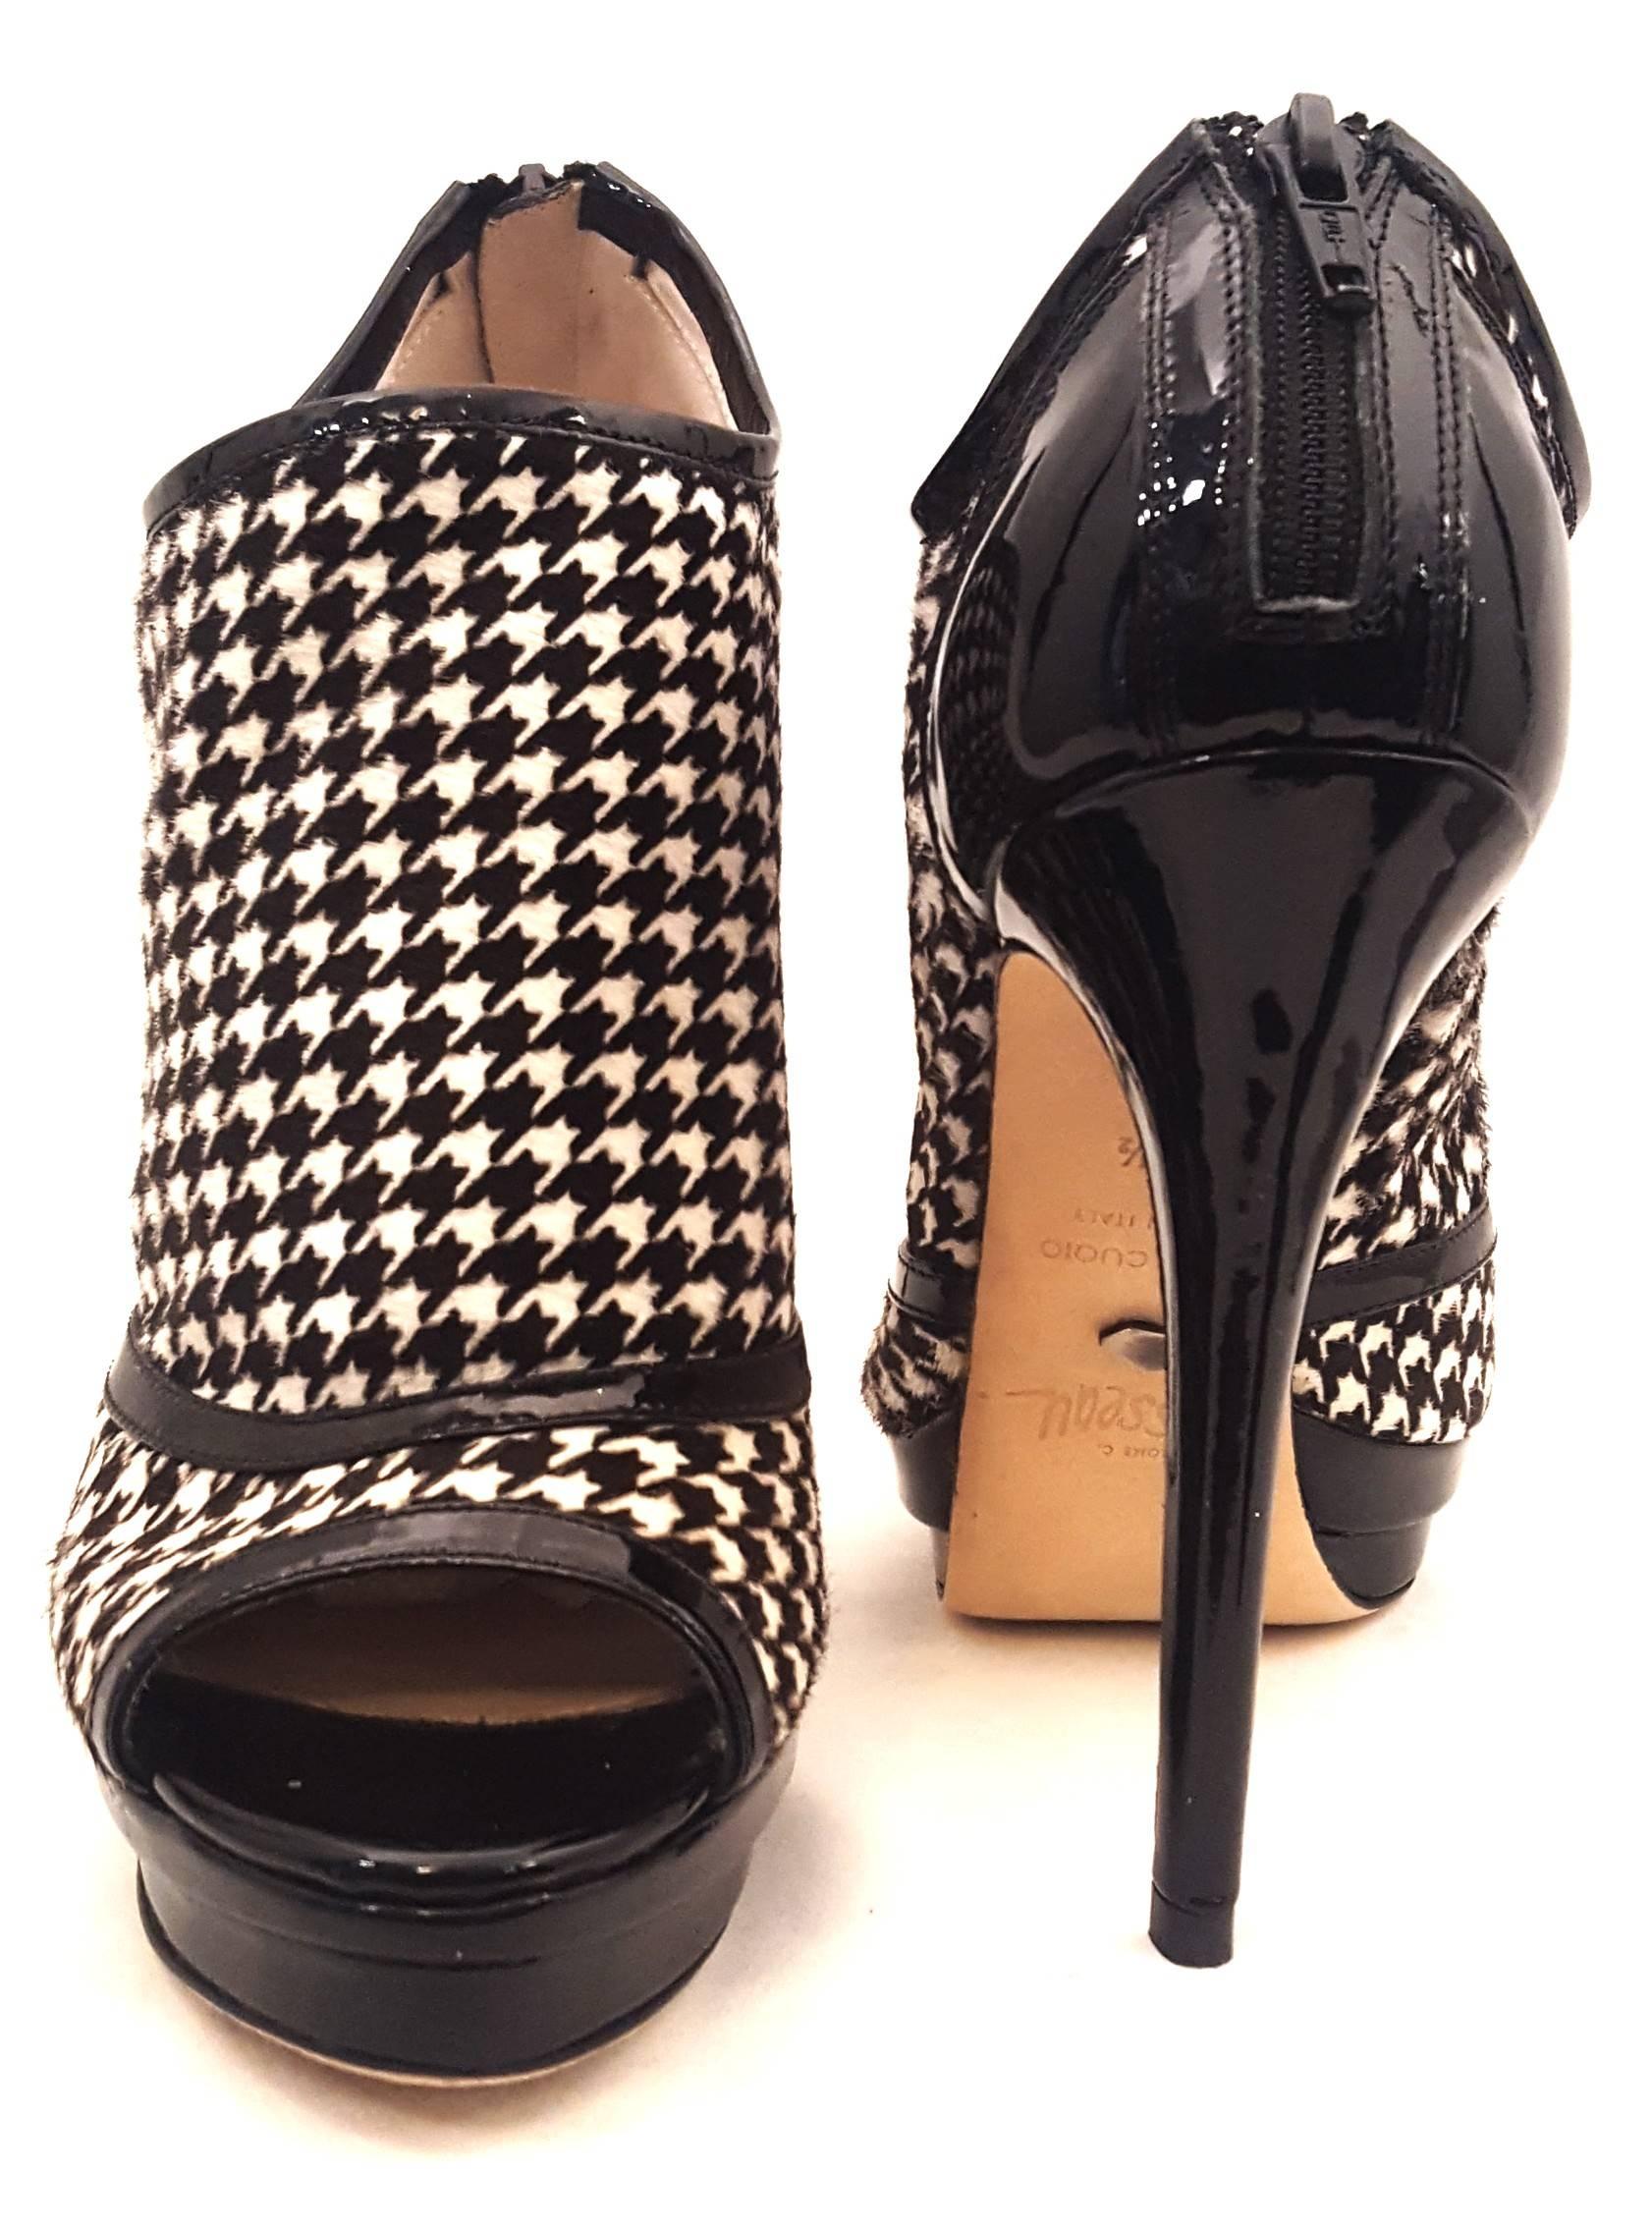 Jerome C. Rousseau Elli Black Patent  and White Houndstooth Fabric Boots  In New Condition For Sale In Palm Beach, FL